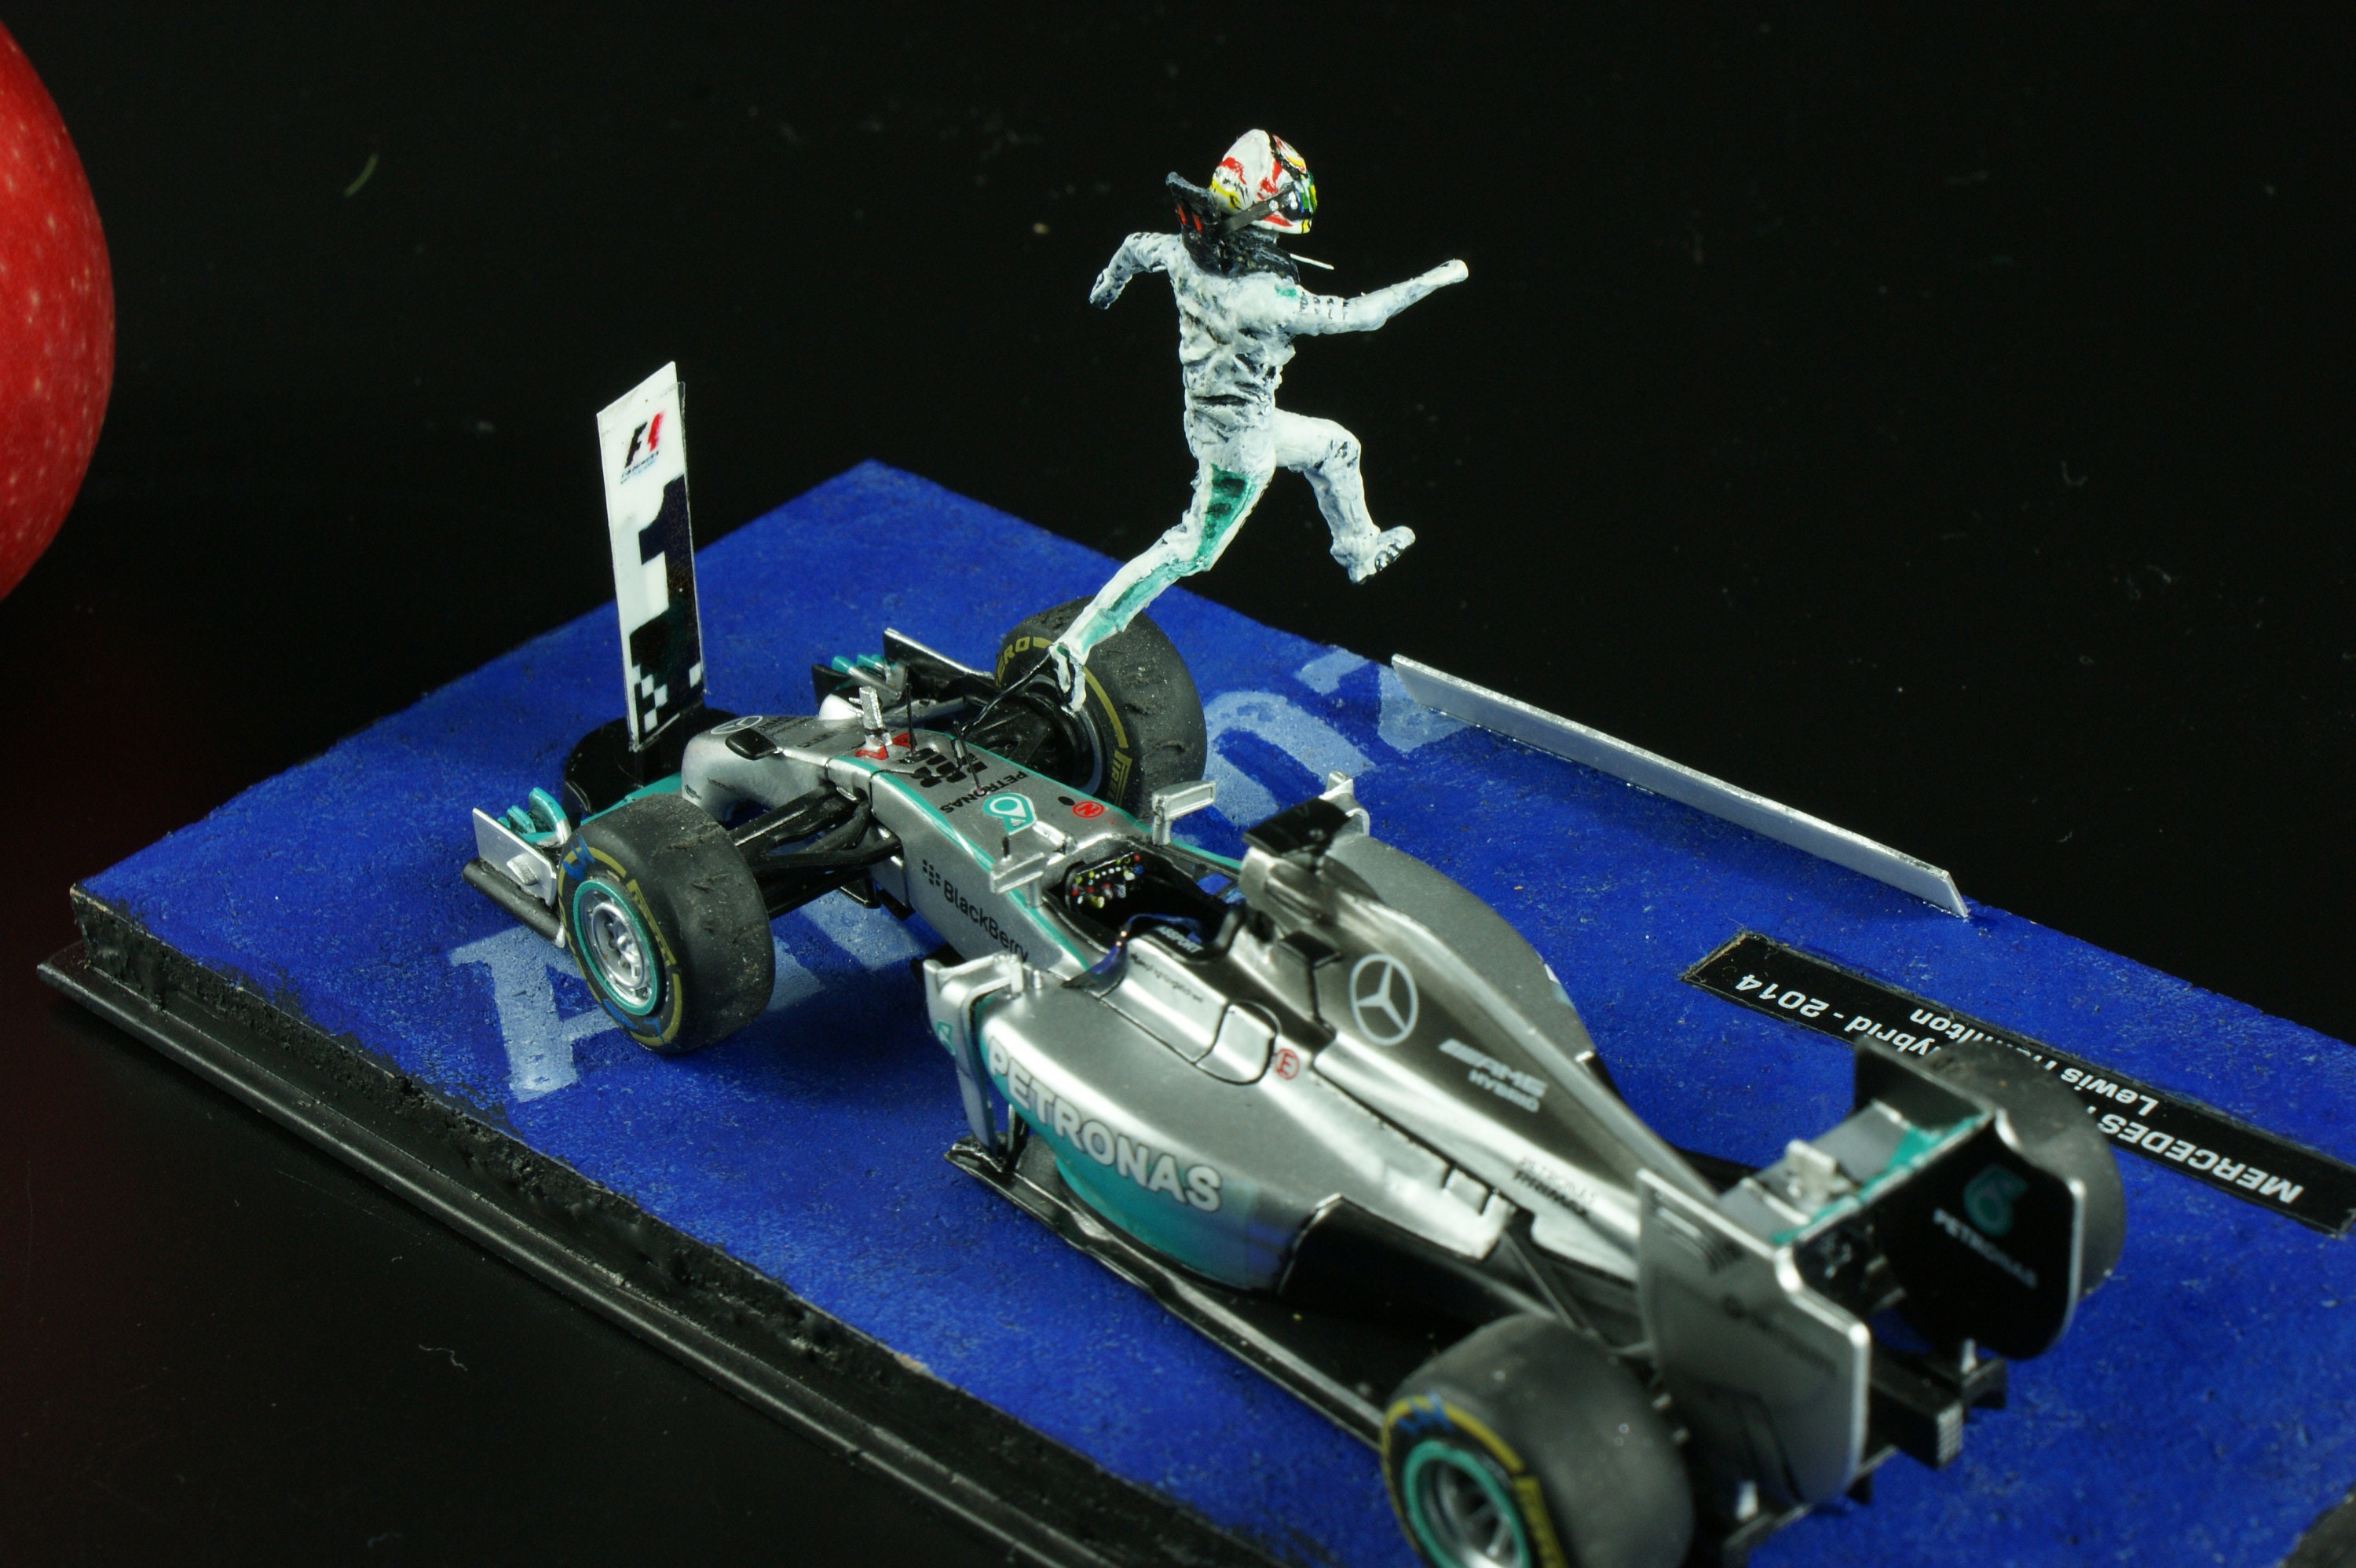 This incredibly detailed 1:4 scale model of Lewis Hamilton's F1